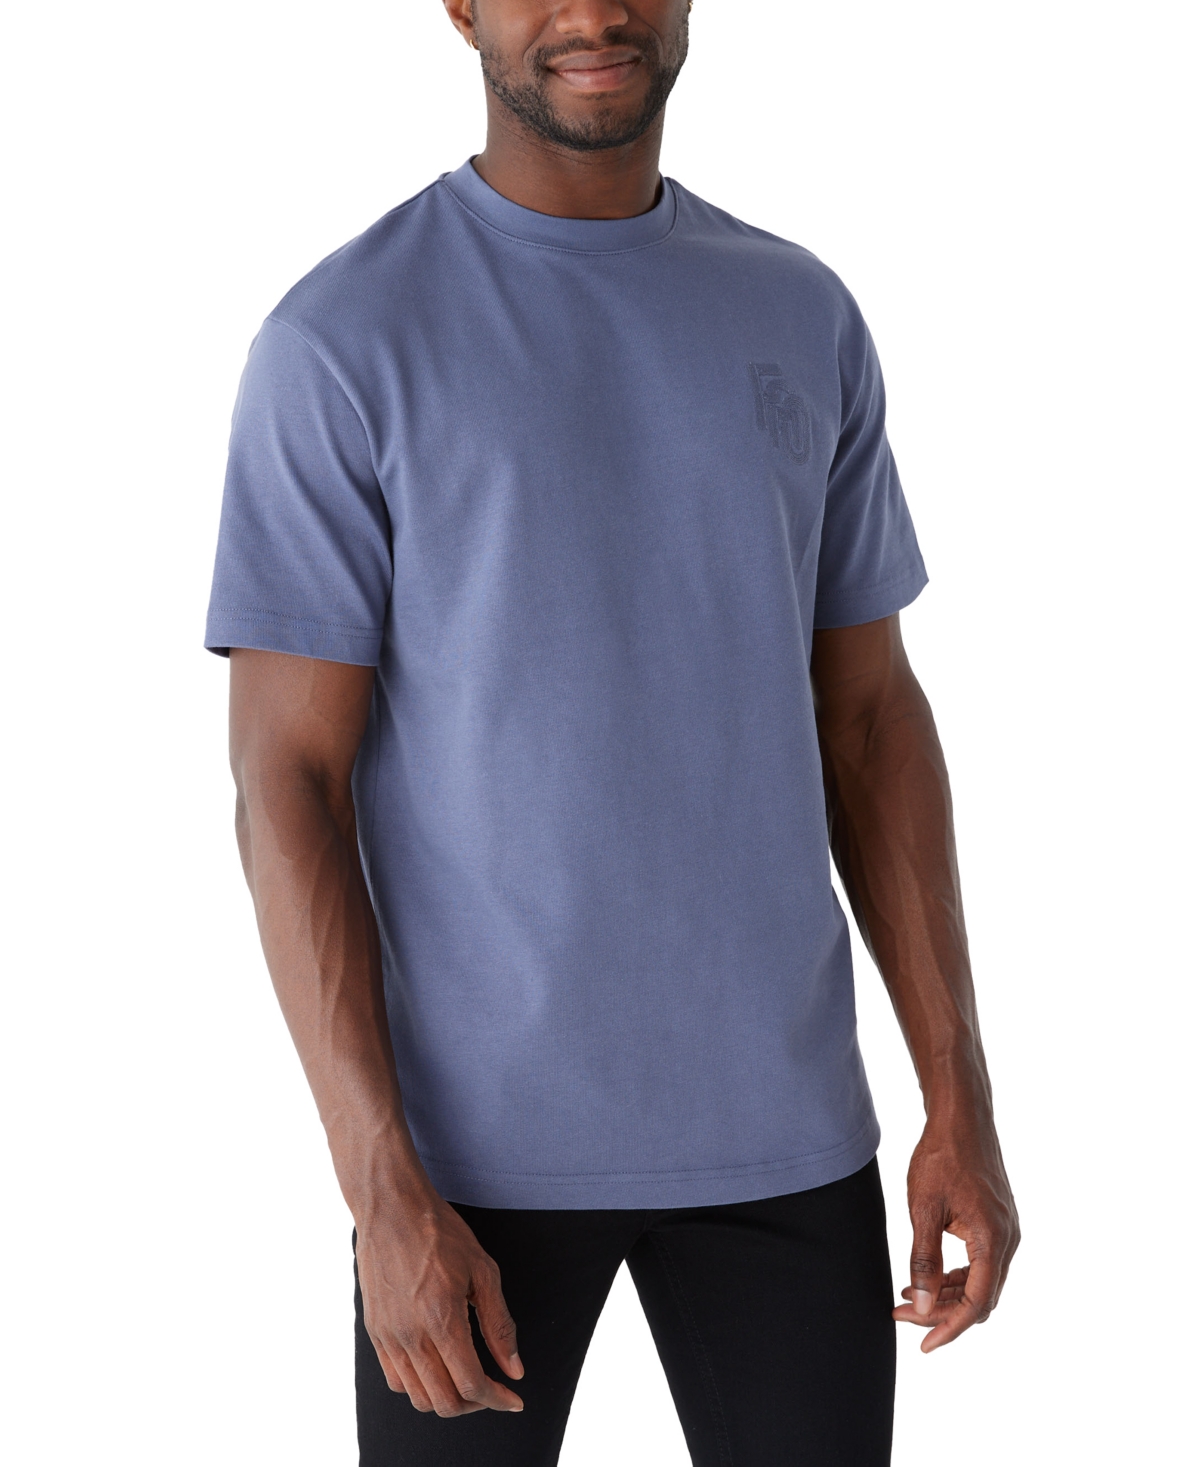 Men's Relaxed Fit Short Sleeve Embroidered Crewneck T-Shirt - Nightshadow Blue